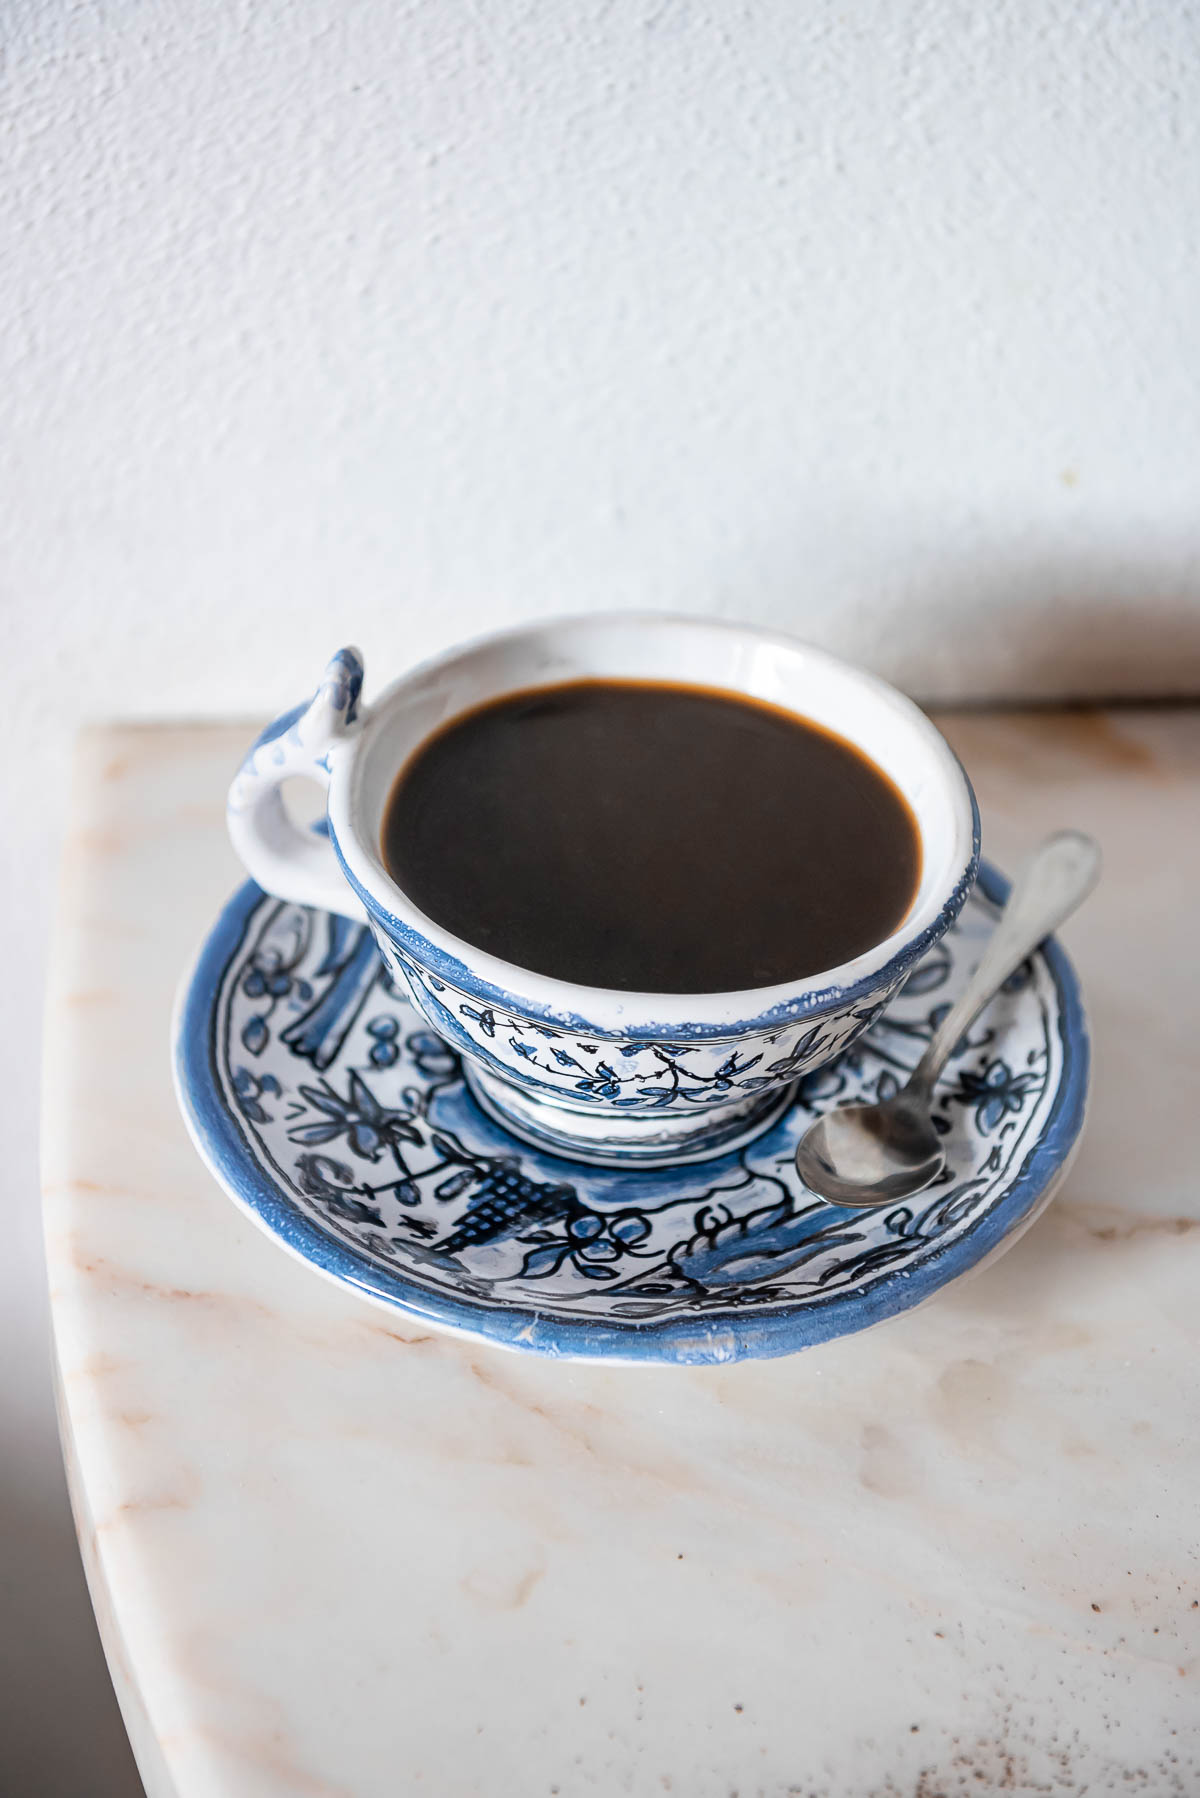 A cup of coffee in traditional Portuguese pottery